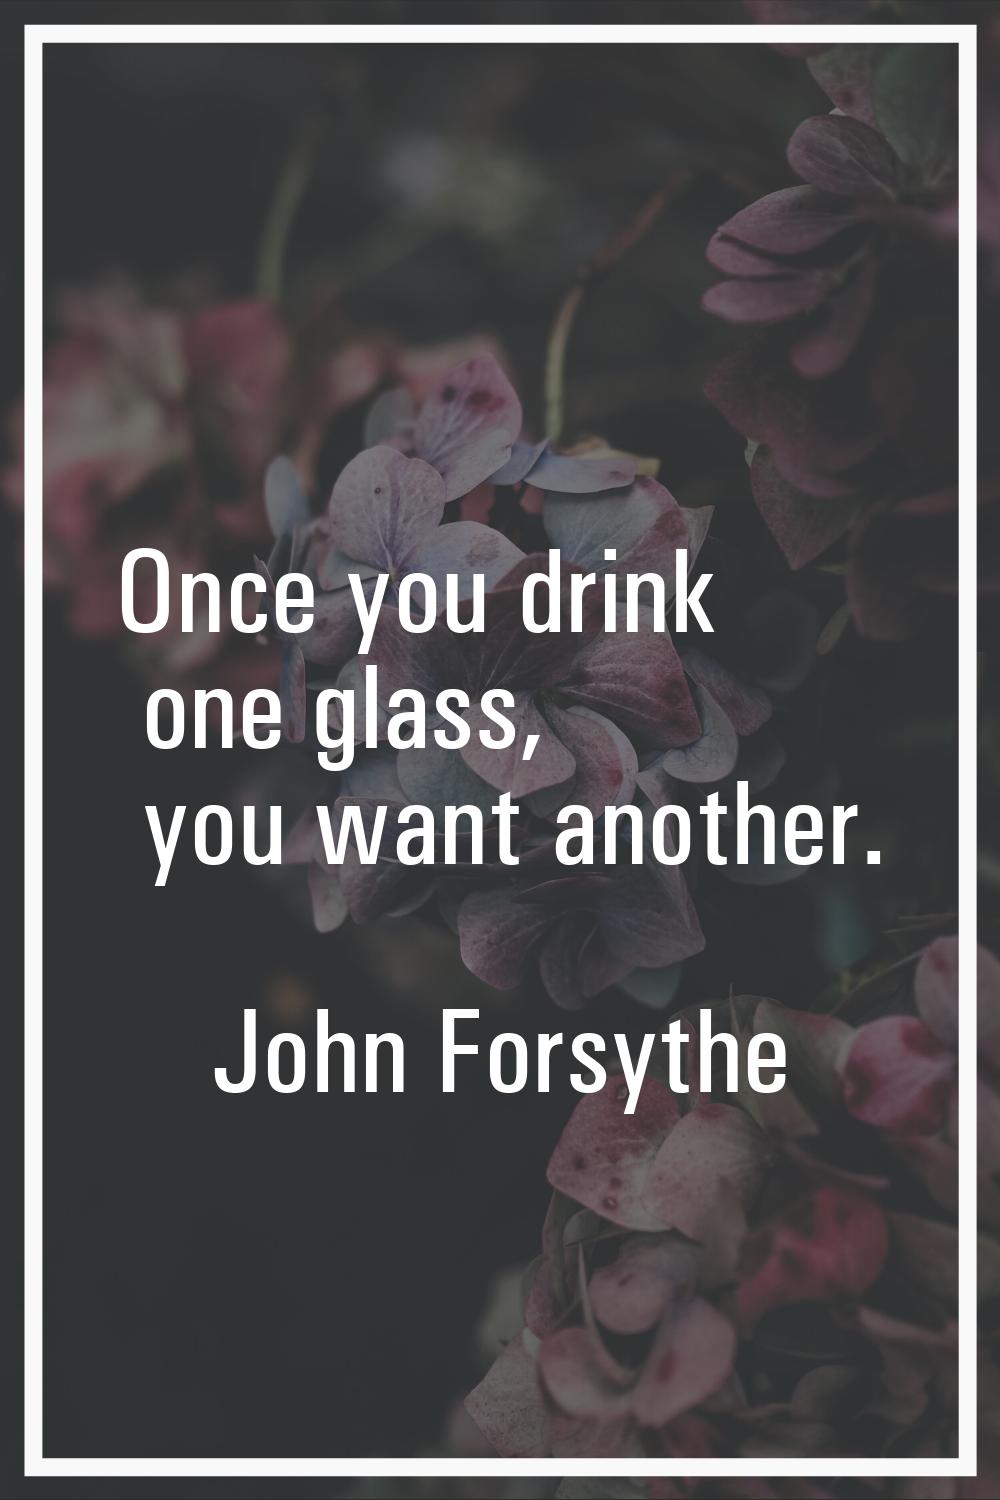 Once you drink one glass, you want another.